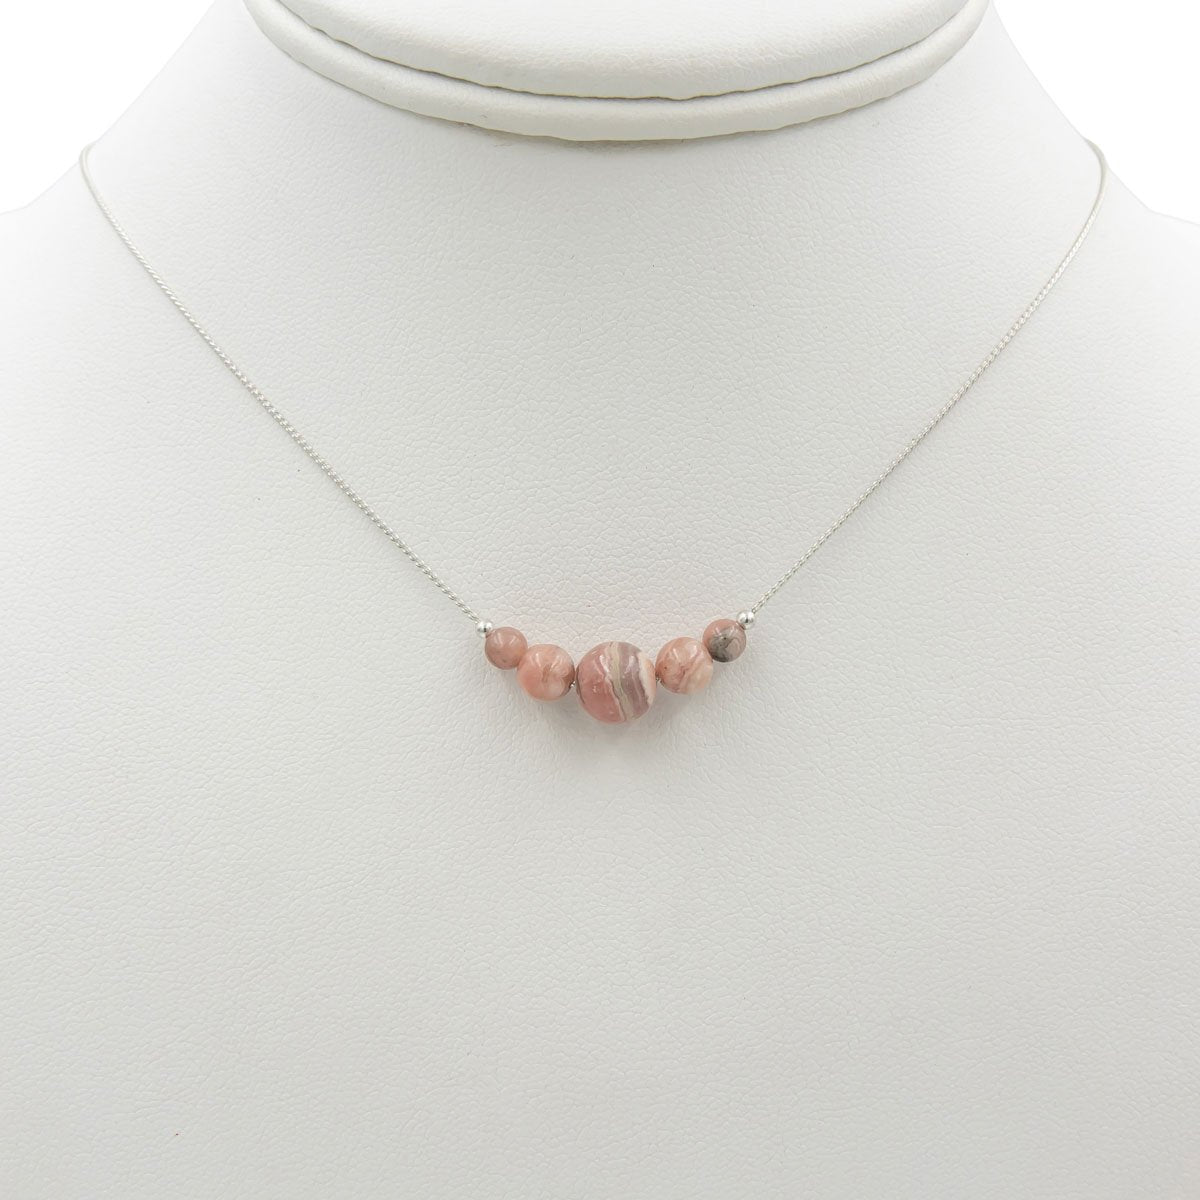 Handmade Rhodochrosite Sterling Silver Necklace | Eco-Friendly Jewelry | Adjustable Length | Hypoallergenic & Nickel-Free | Natural Stone